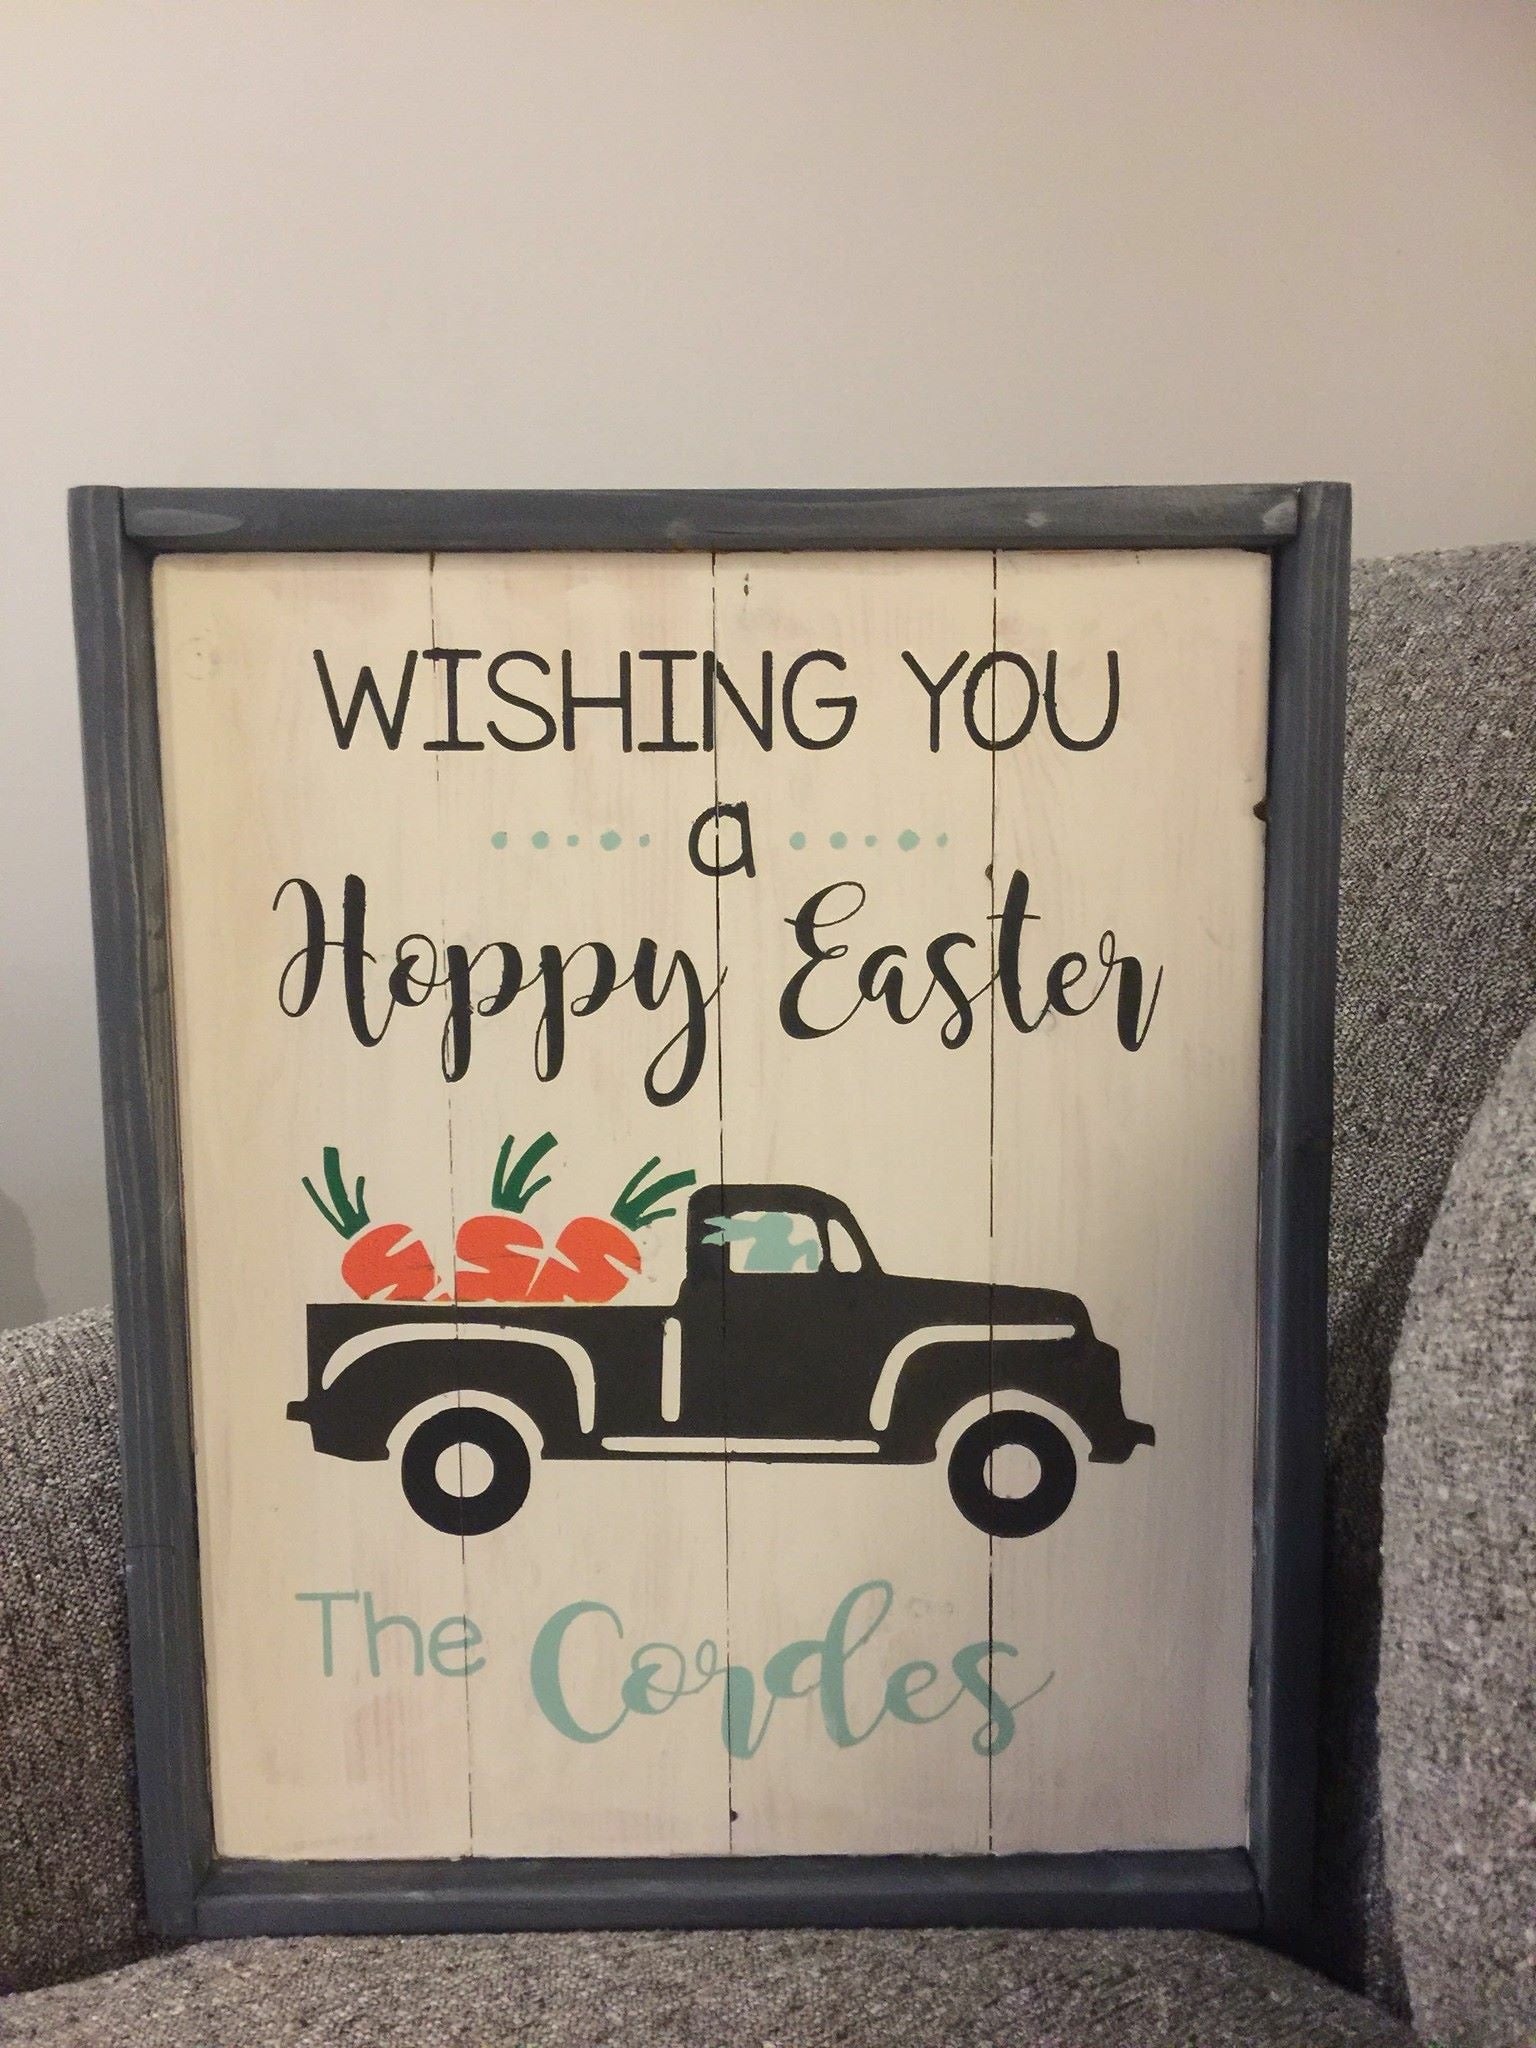 Wishing you a happy Easter with truck and Family name